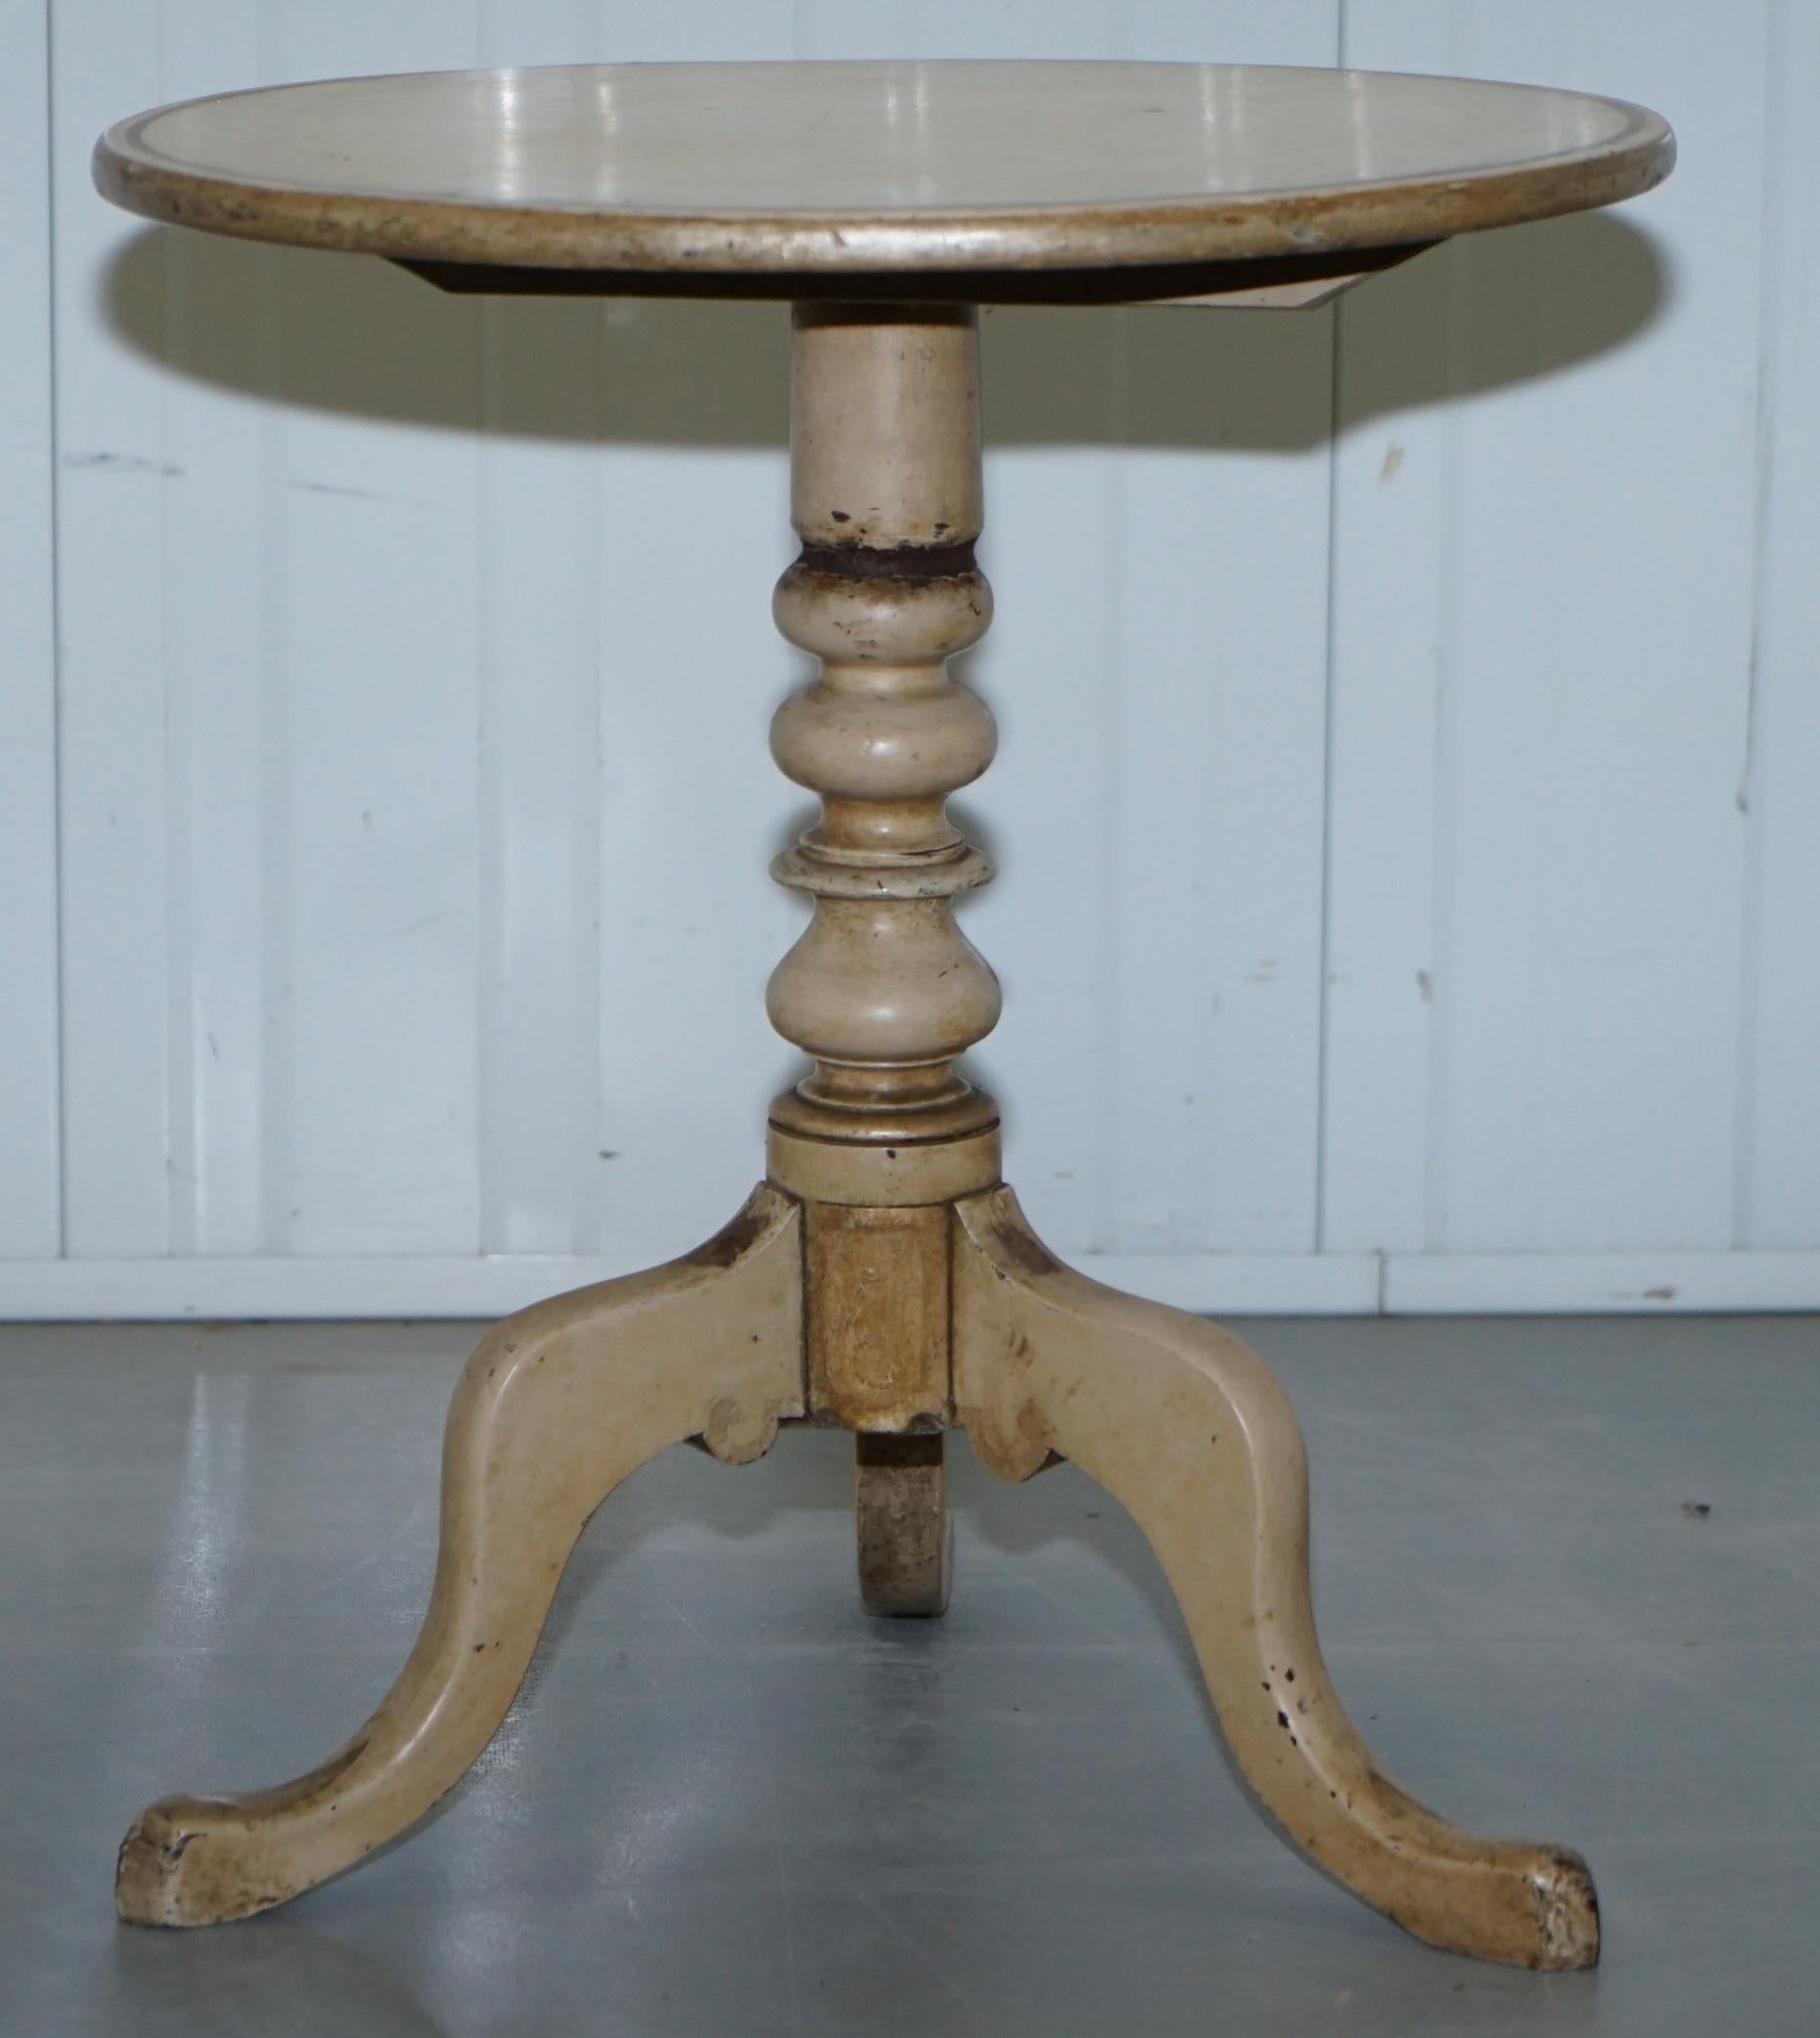 We are delighted to offer for sale this original Victorian tripod table with early period distressed paintwork 

This table is a Victorian tilt top side lamp wine tripod table, it was overpainted with this chalky creamy white paint decades ago and